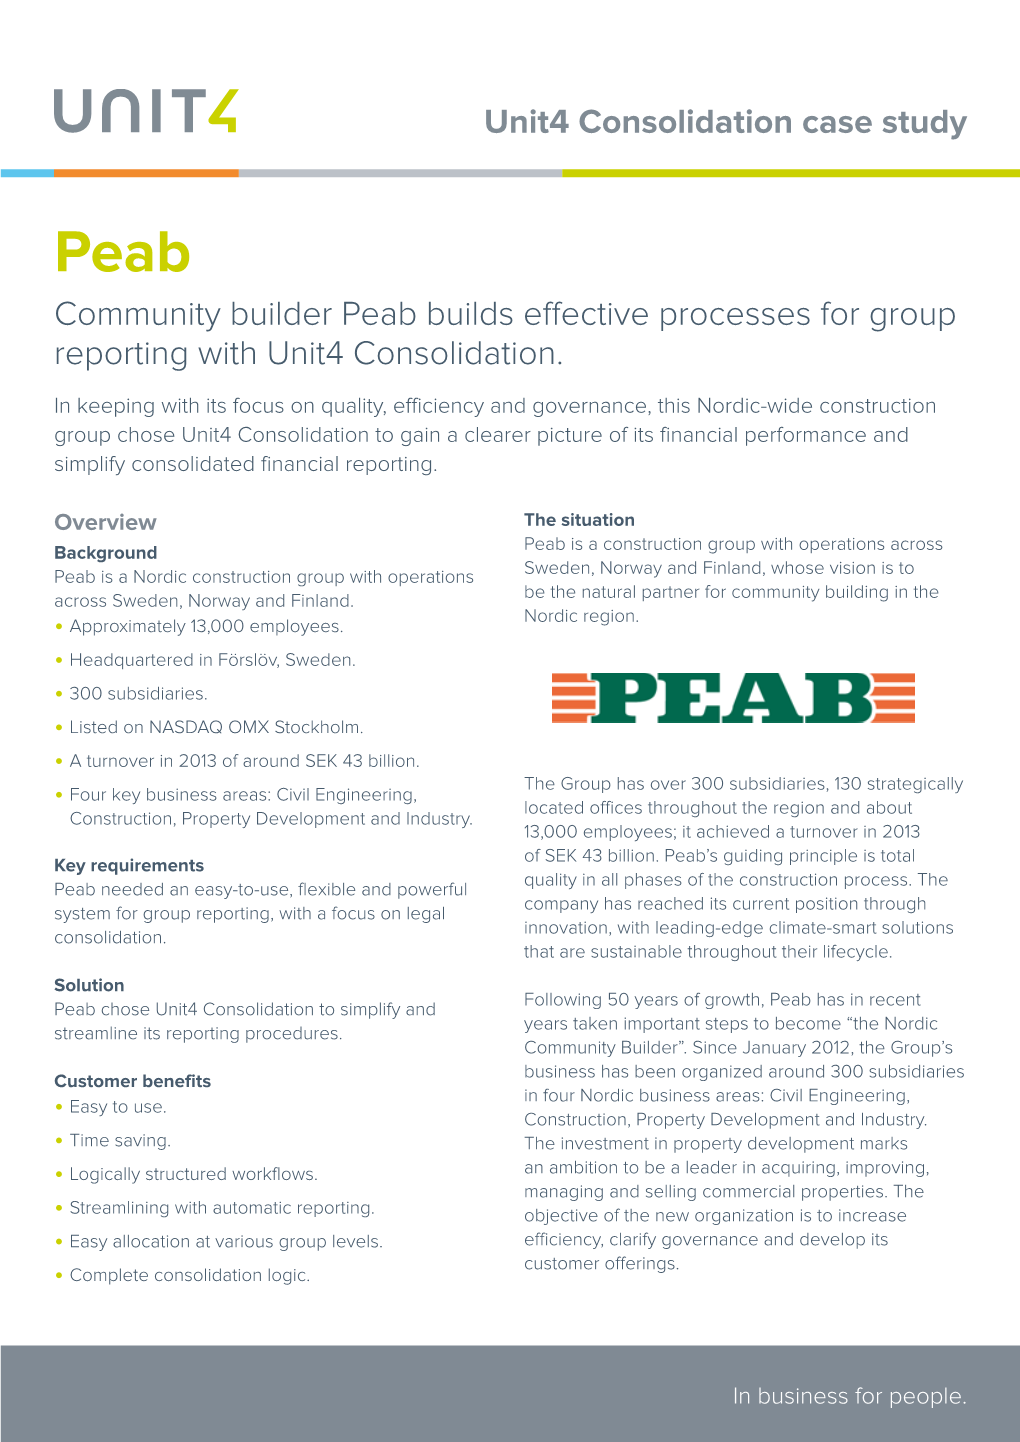 Peab Community Builder Peab Builds Effective Processes for Group Reporting with Unit4 Consolidation